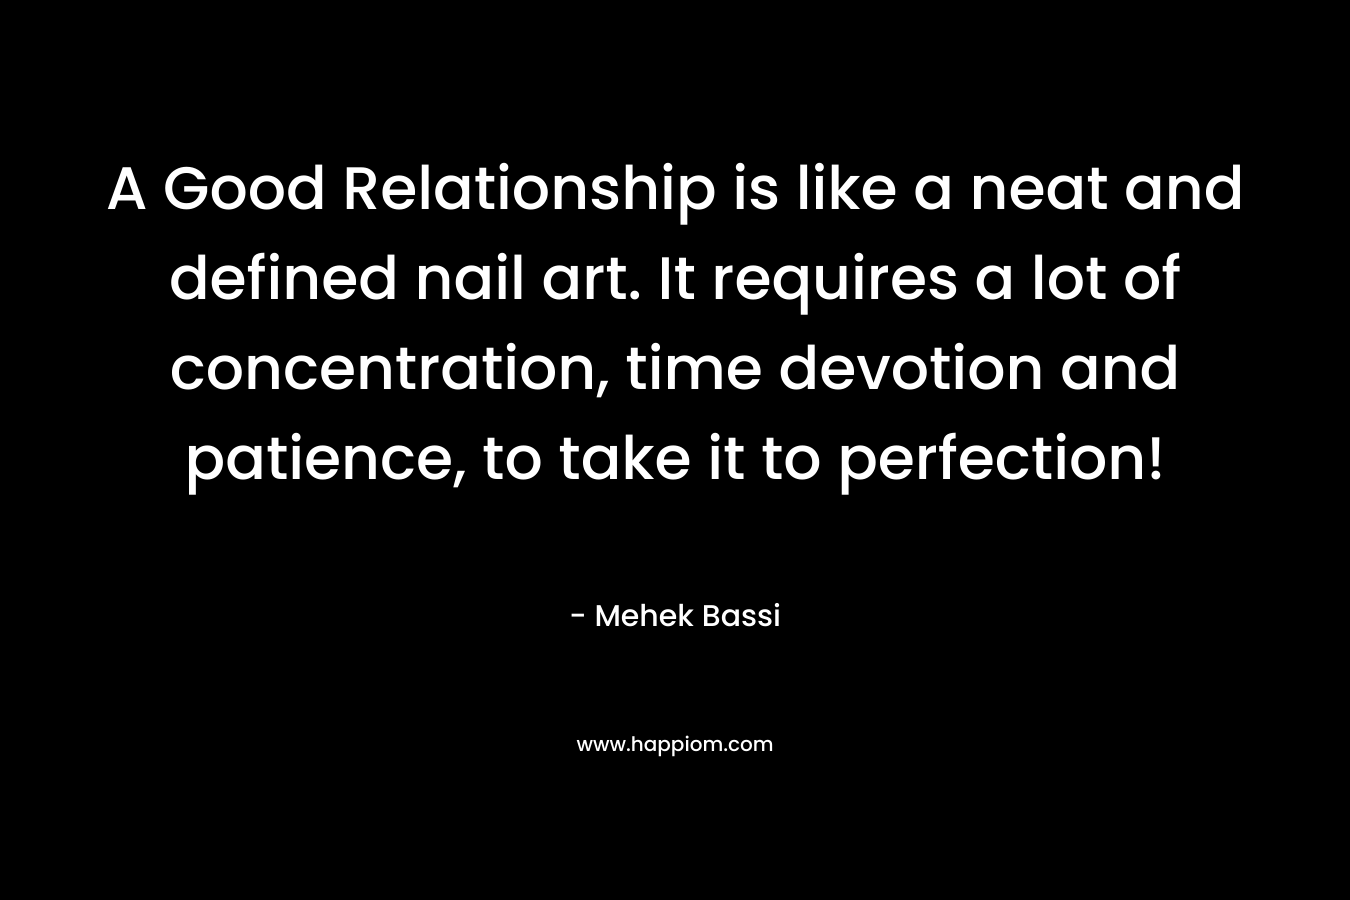 A Good Relationship is like a neat and defined nail art. It requires a lot of concentration, time devotion and patience, to take it to perfection! – Mehek Bassi